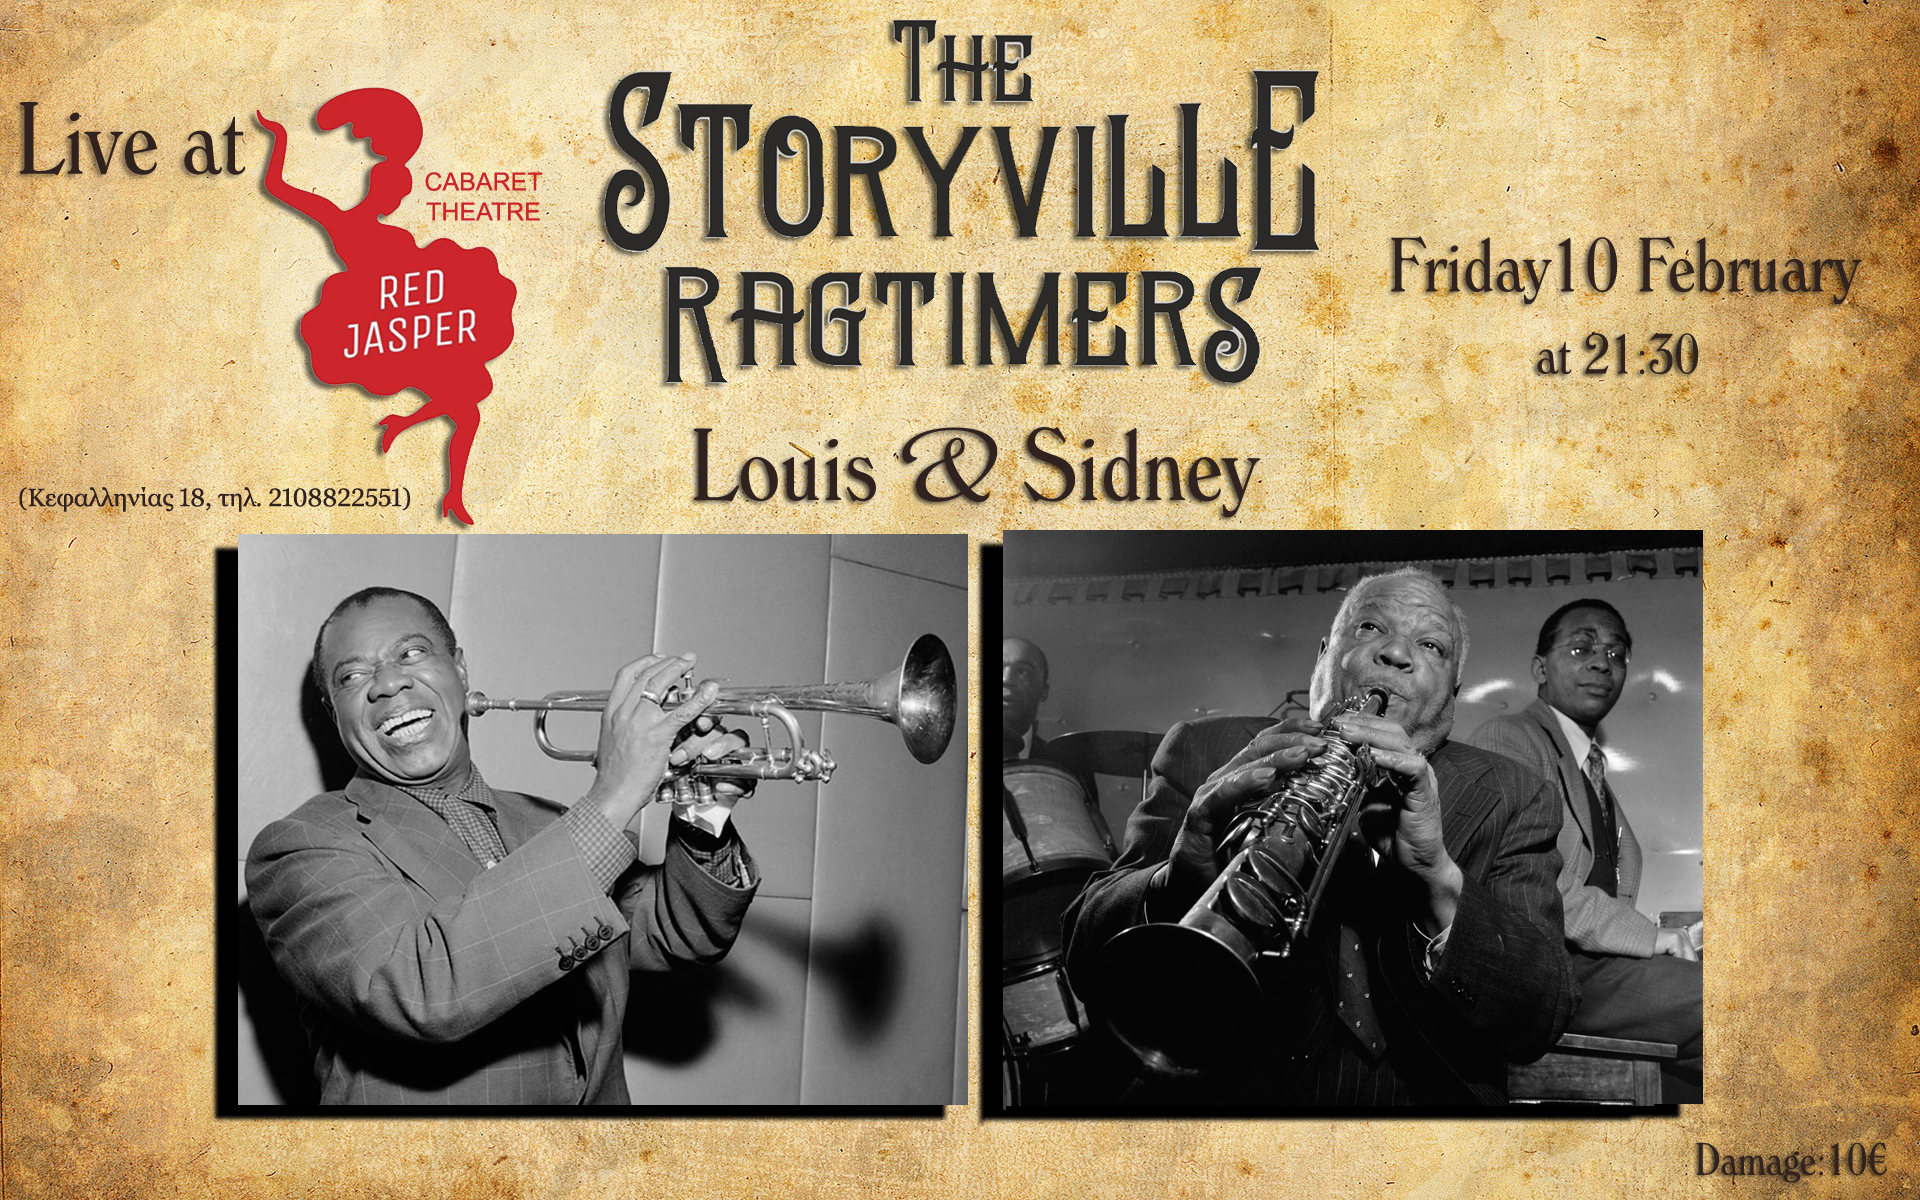 The Storyville Ragtimers